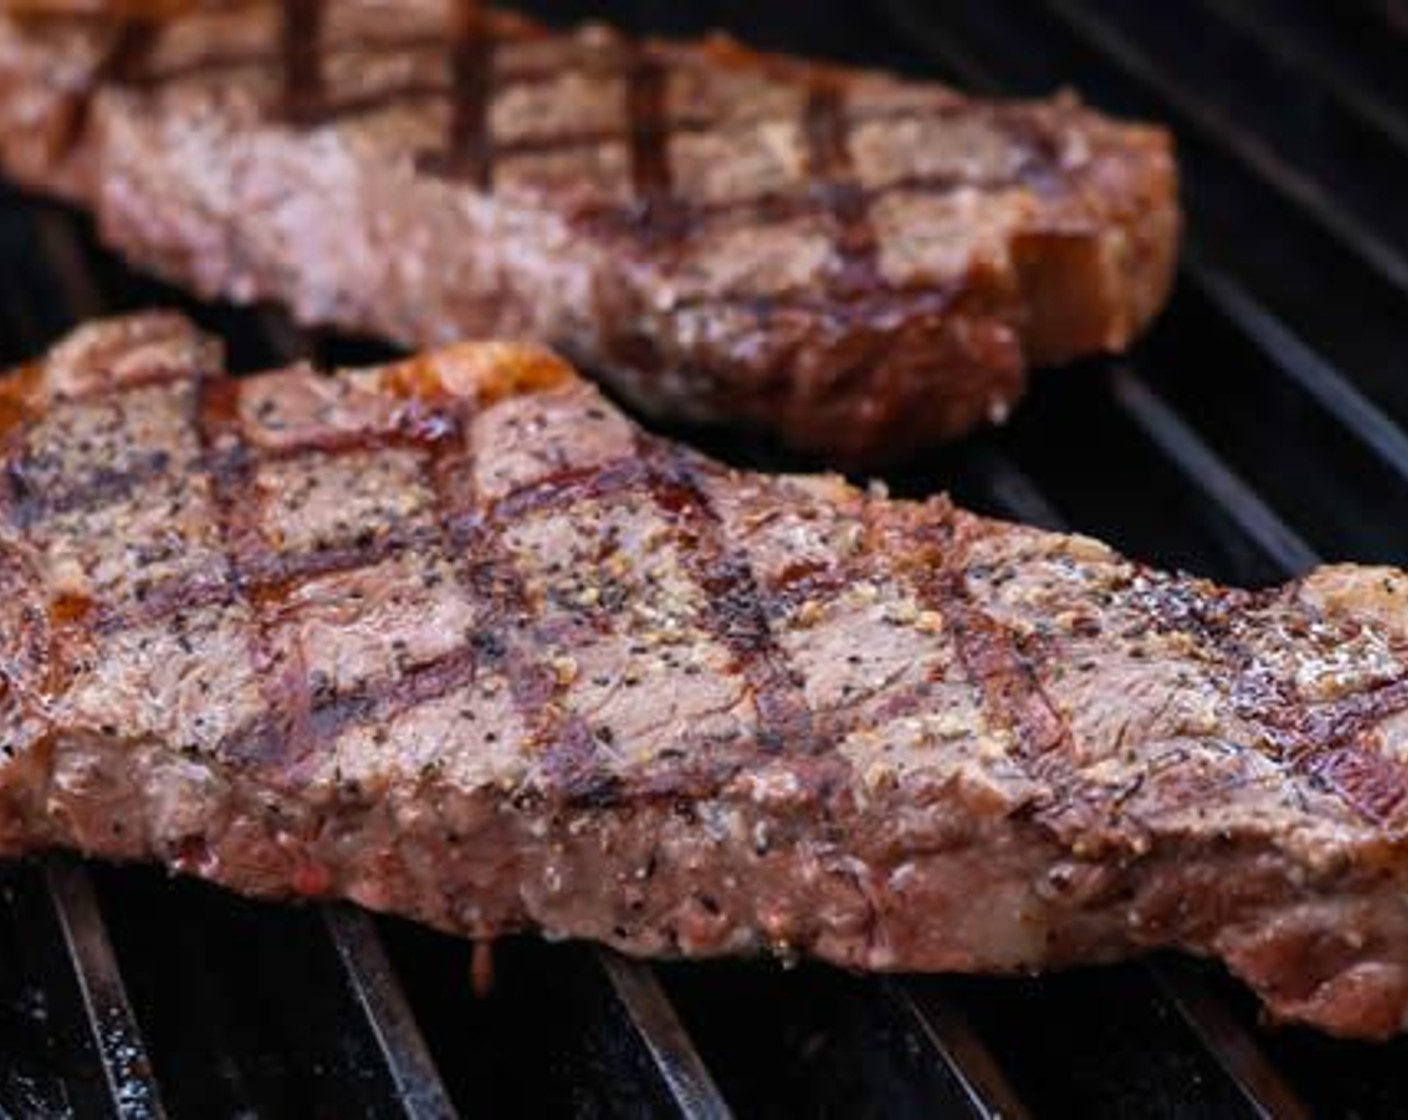 step 6 Sear steaks on grill grates about 3 minutes per side or to your desired doneness. For perfect grill marks rotate steaks after 1 ½ minutes on each side.